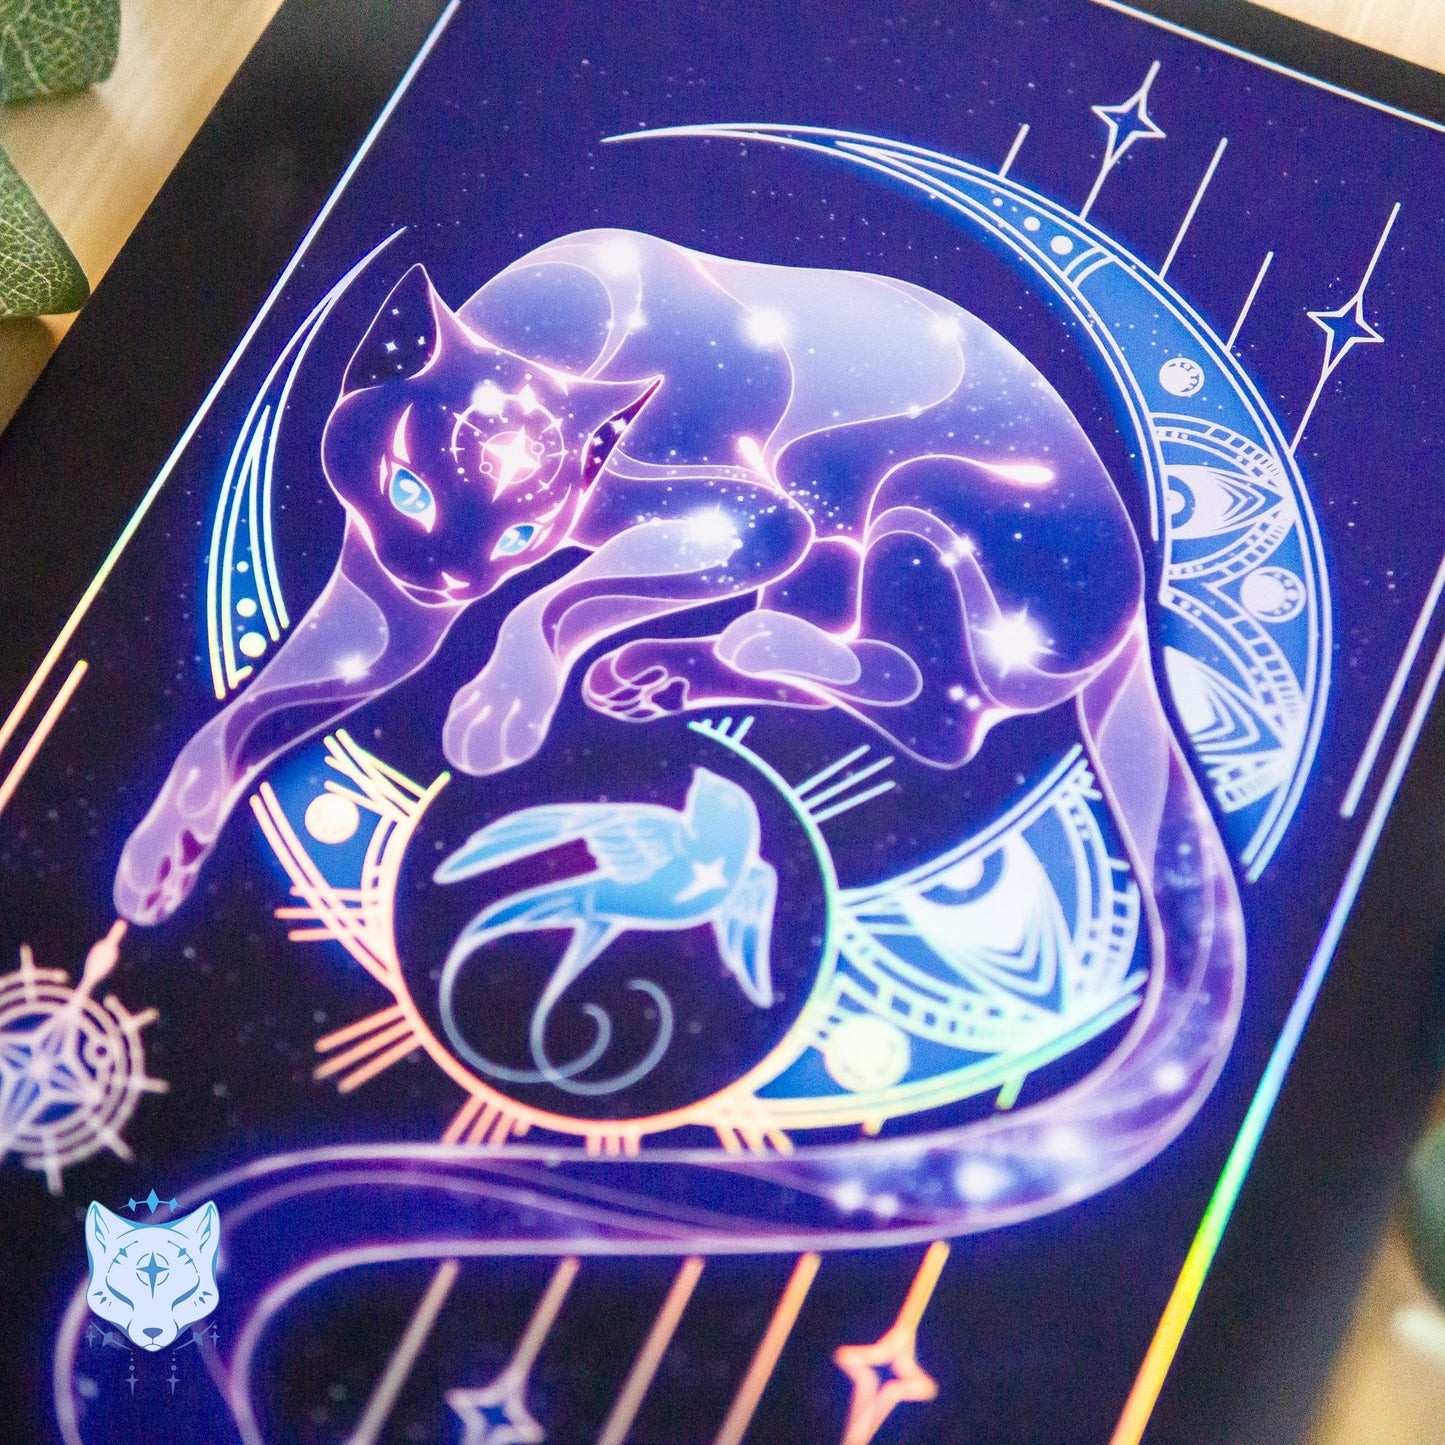 North Star Cat and the Stowaway Star - A4 Holographic Foil Print (PURPLE. Blue version also available)